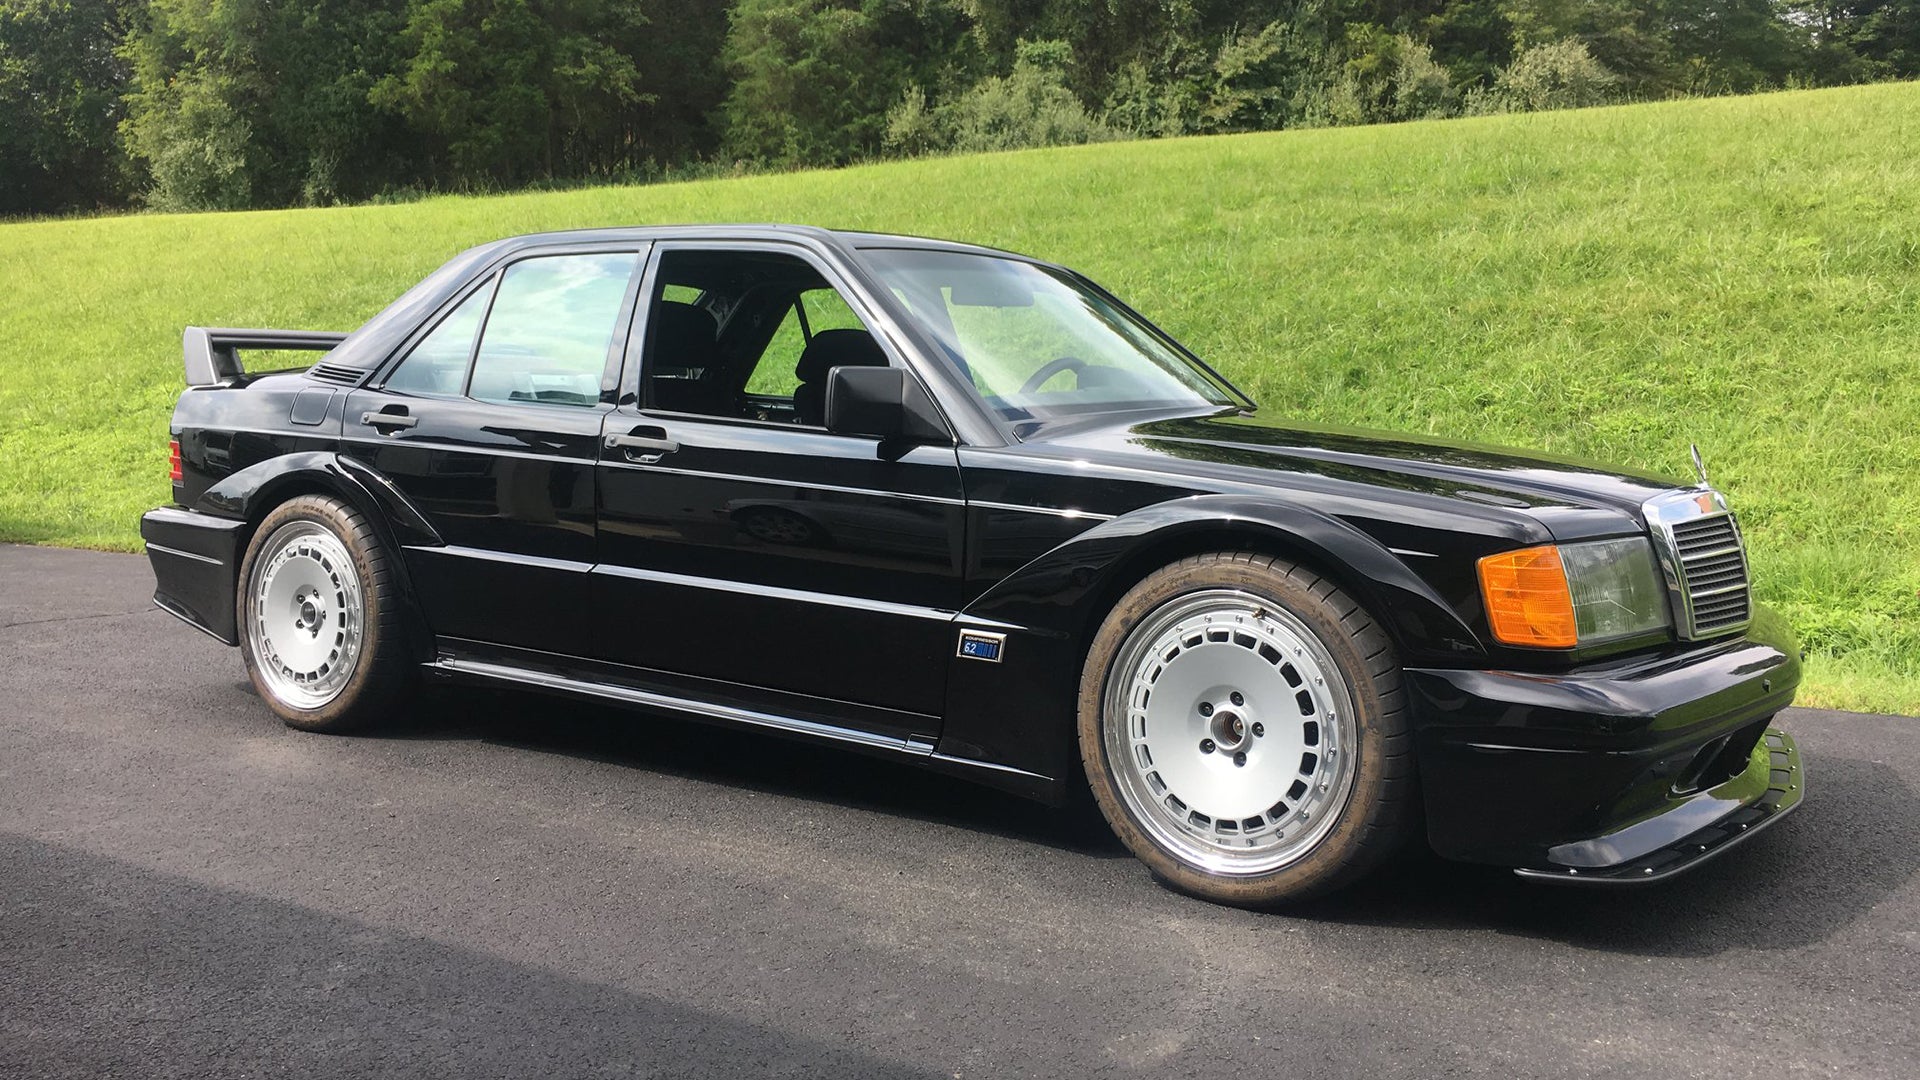 mad-scientists-graft-an-80s-mercedes-benz-190e-body-to-a-modern-c63